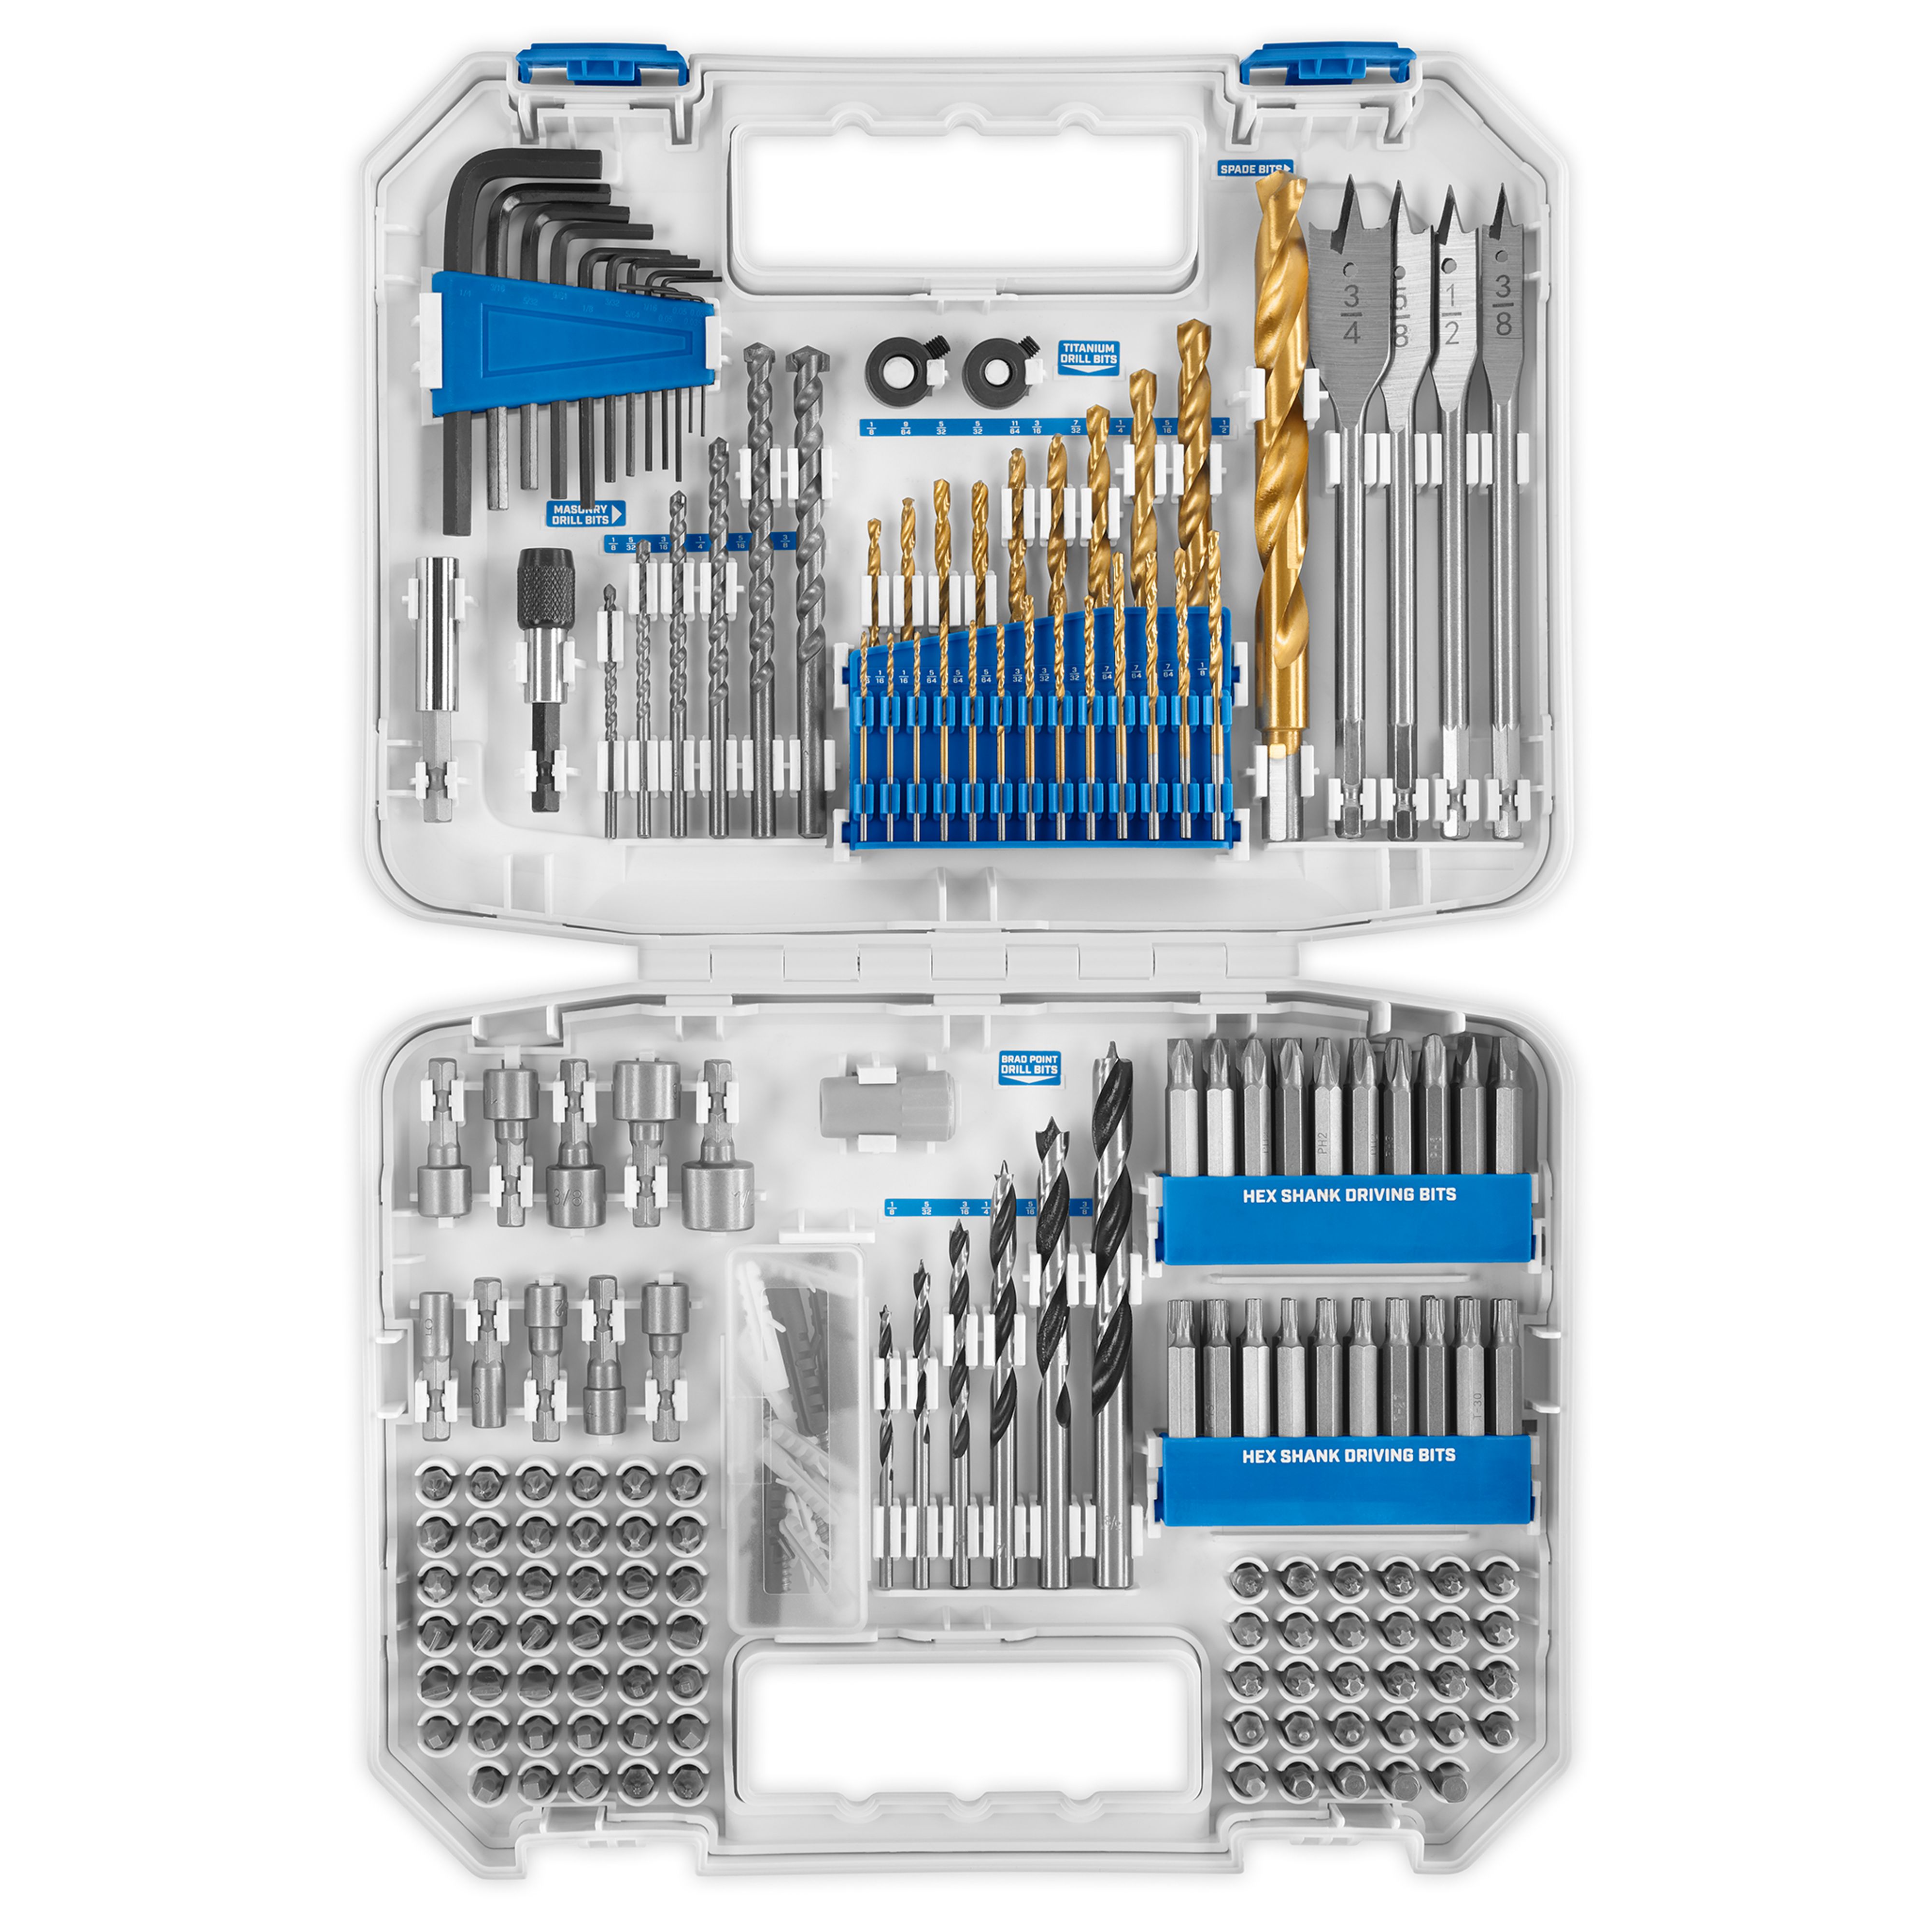 HART 200-Piece Assorted Drill and Drive Bit Set with Storage Case - image 10 of 21